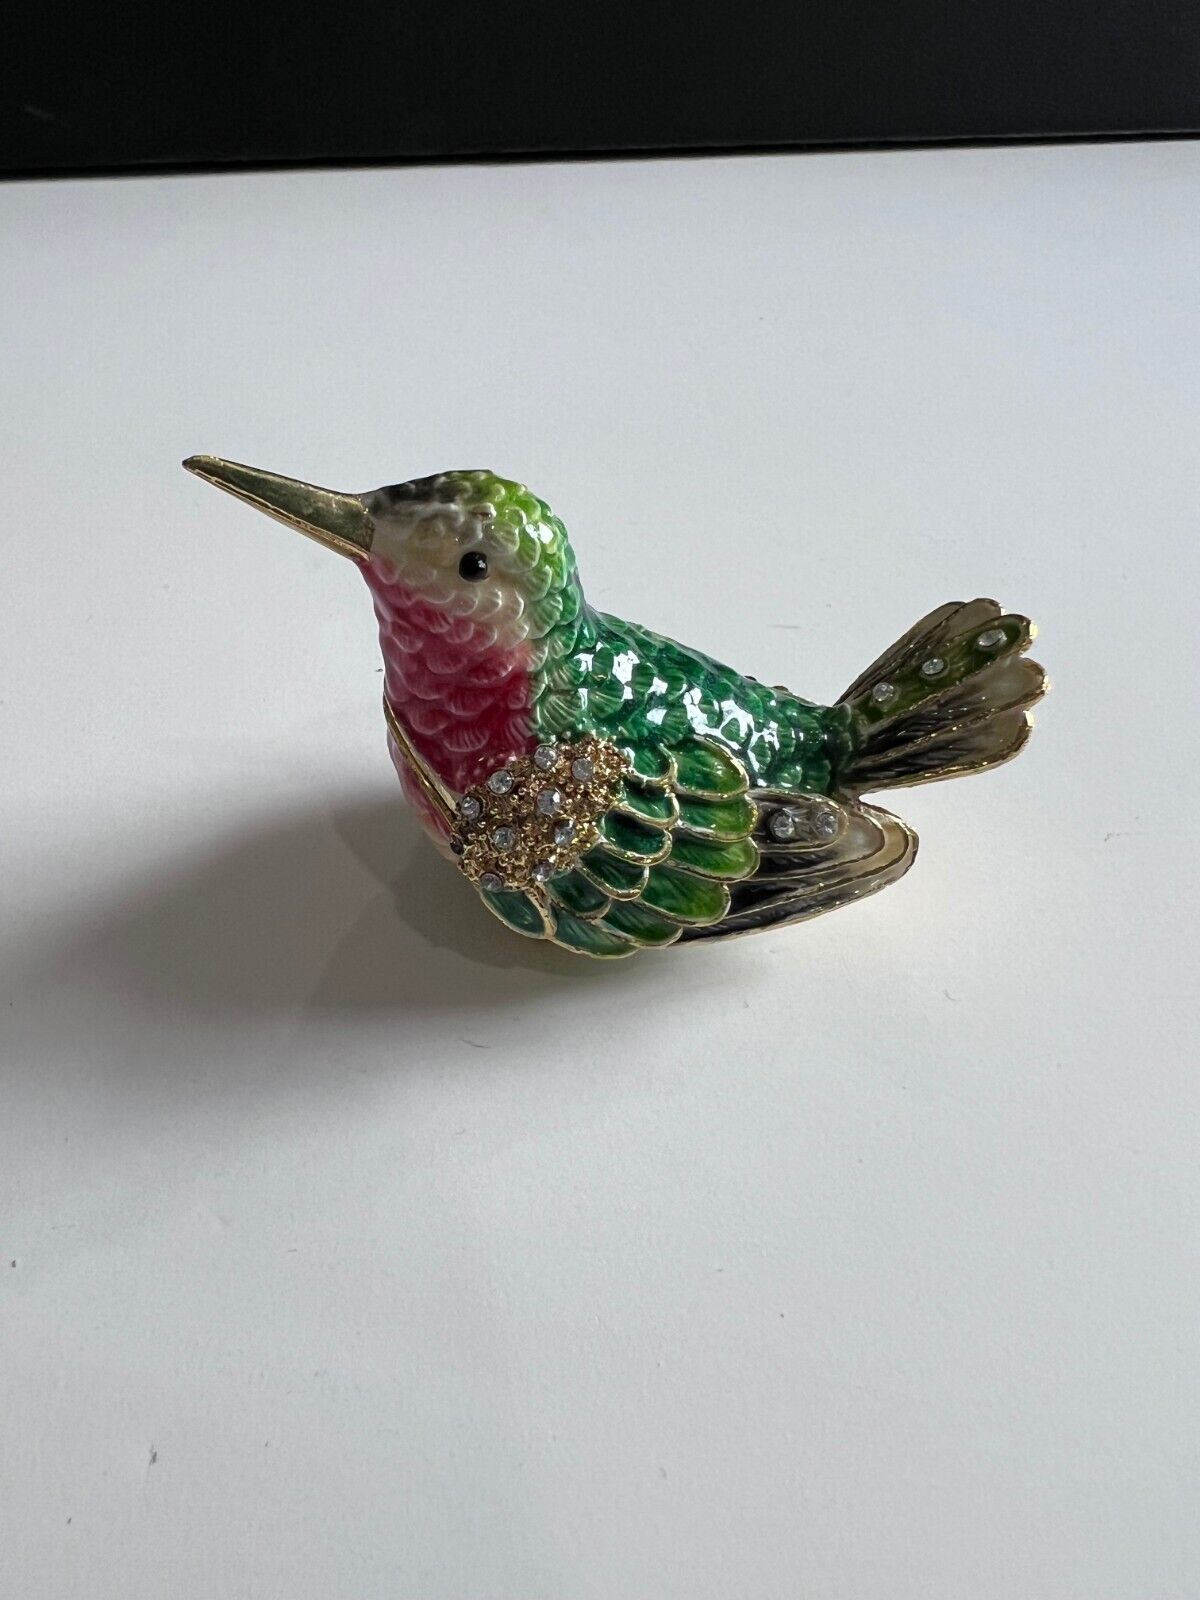 Bejeweled Hinged Trinket/Jeweled Colorful Bird Green/red 